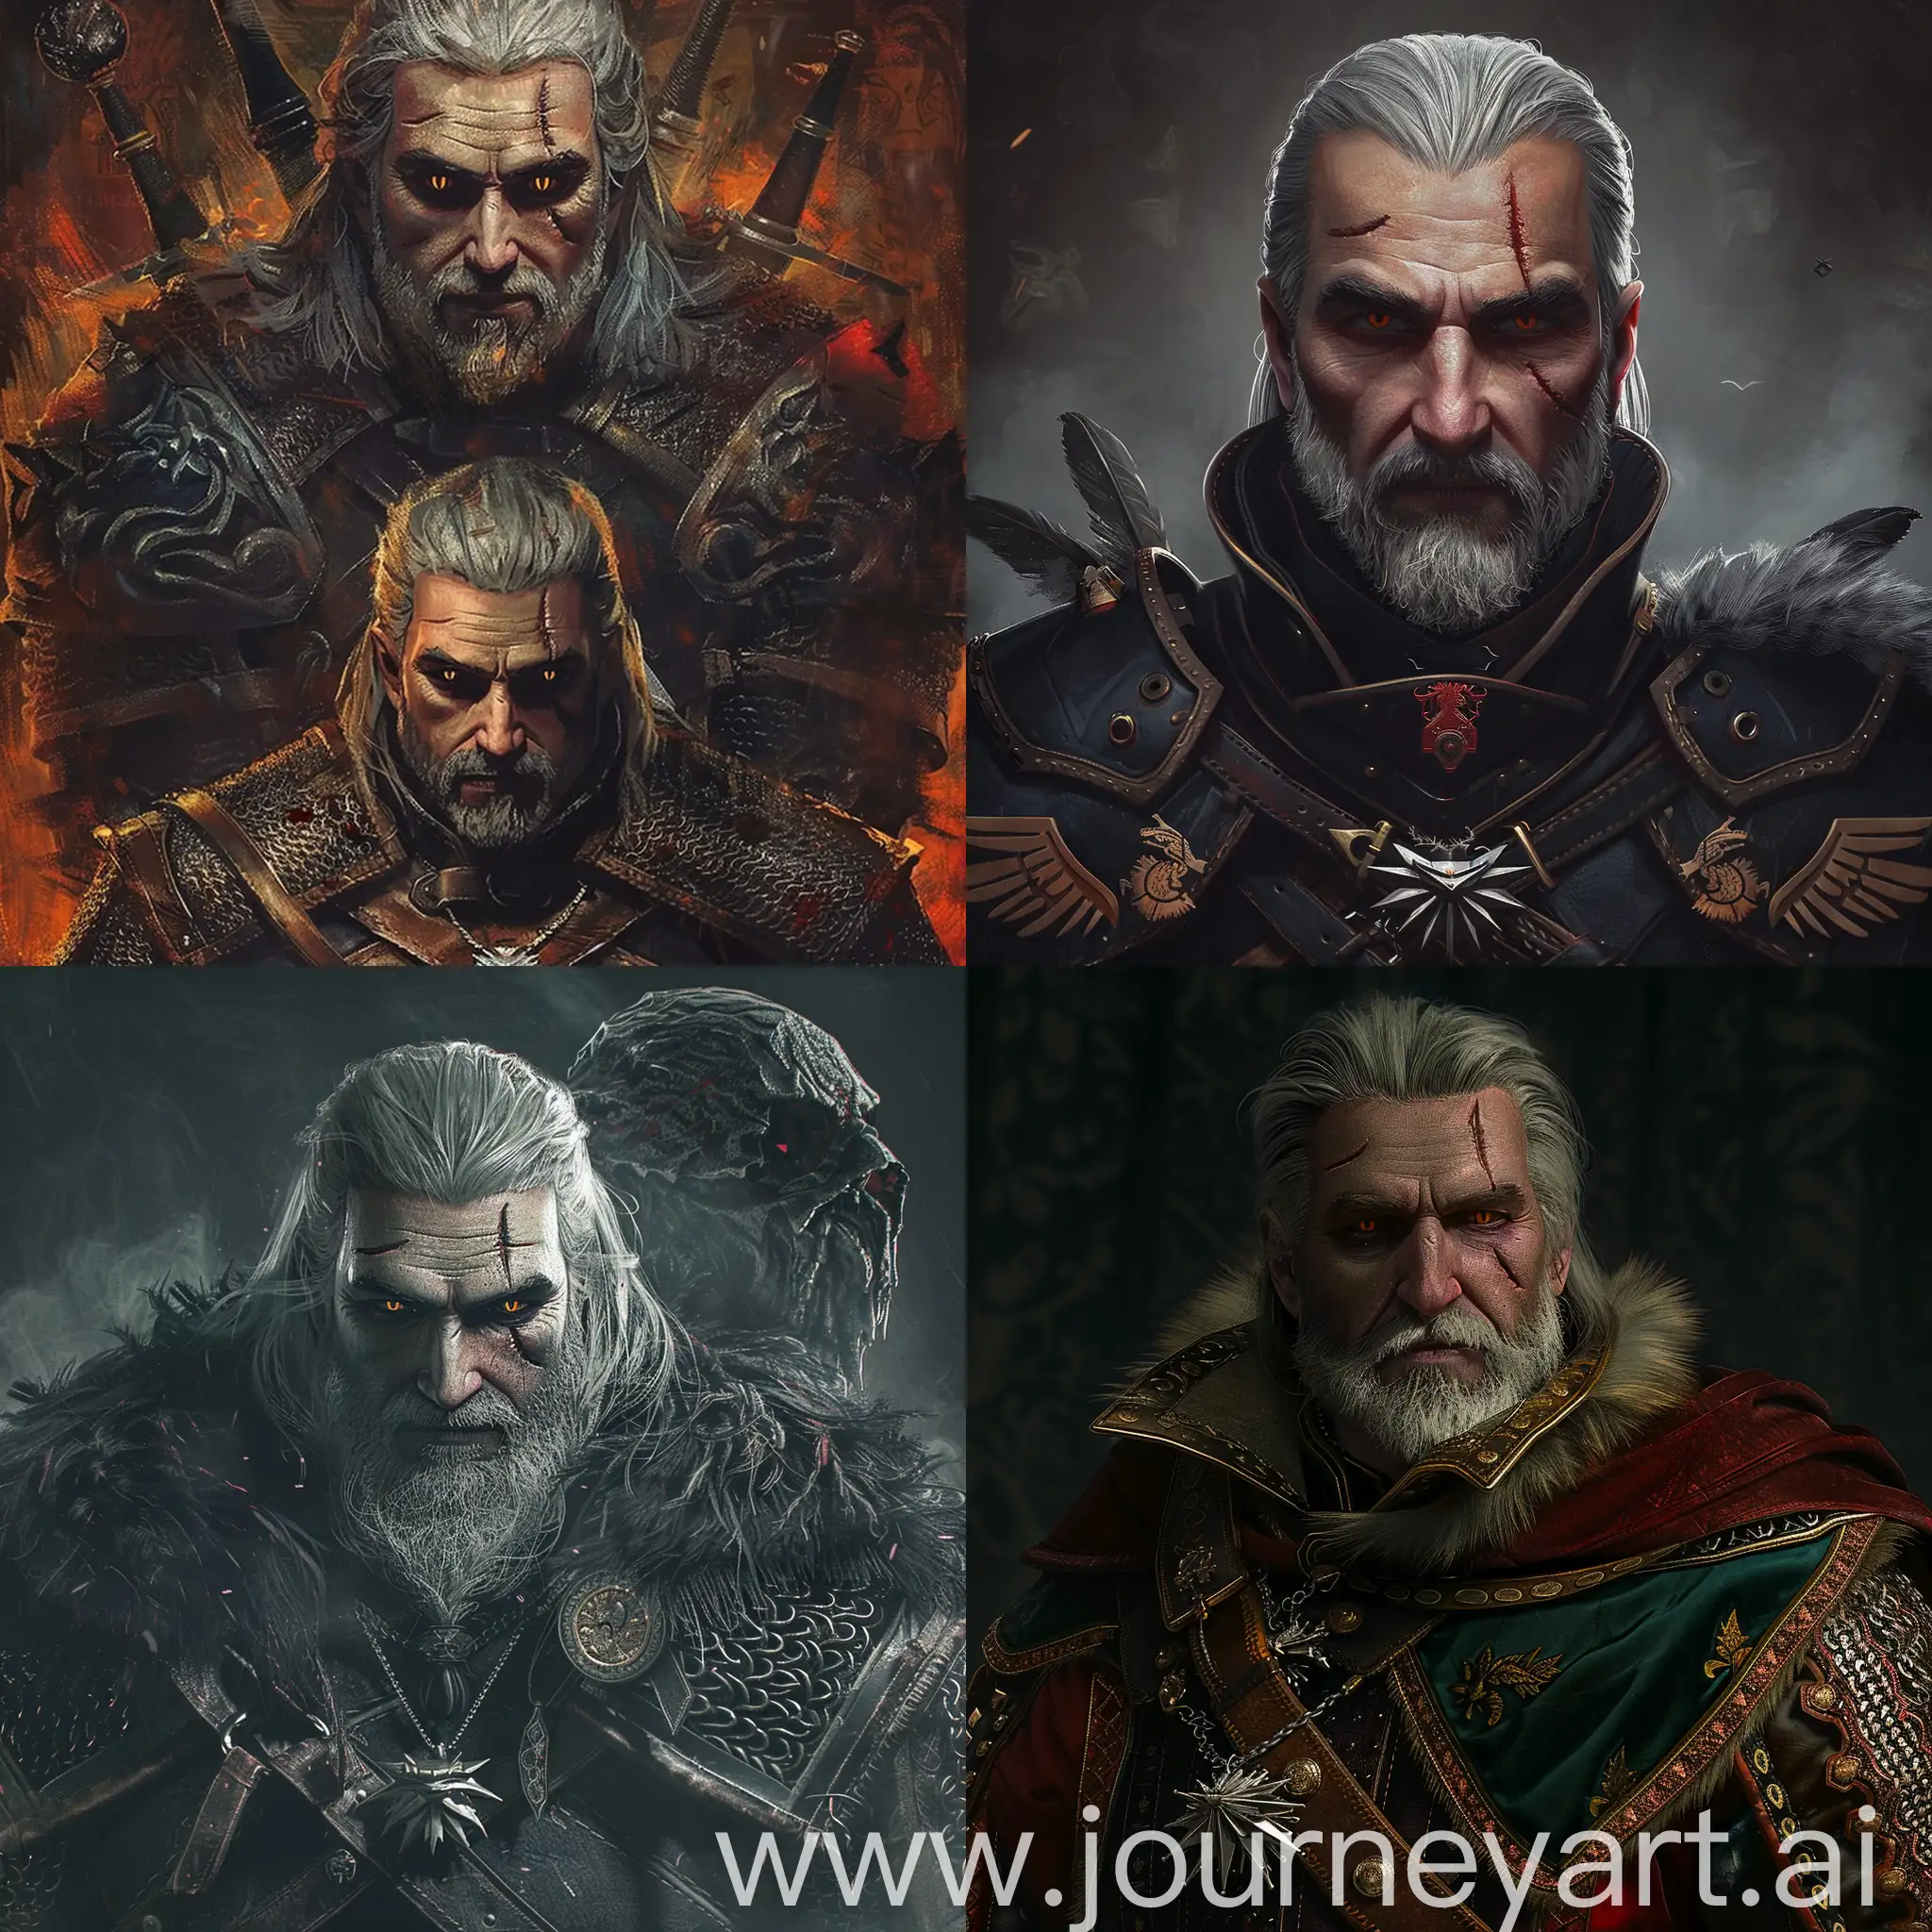 Adolf-Guardian-Transformation-The-Witcher-3-Art